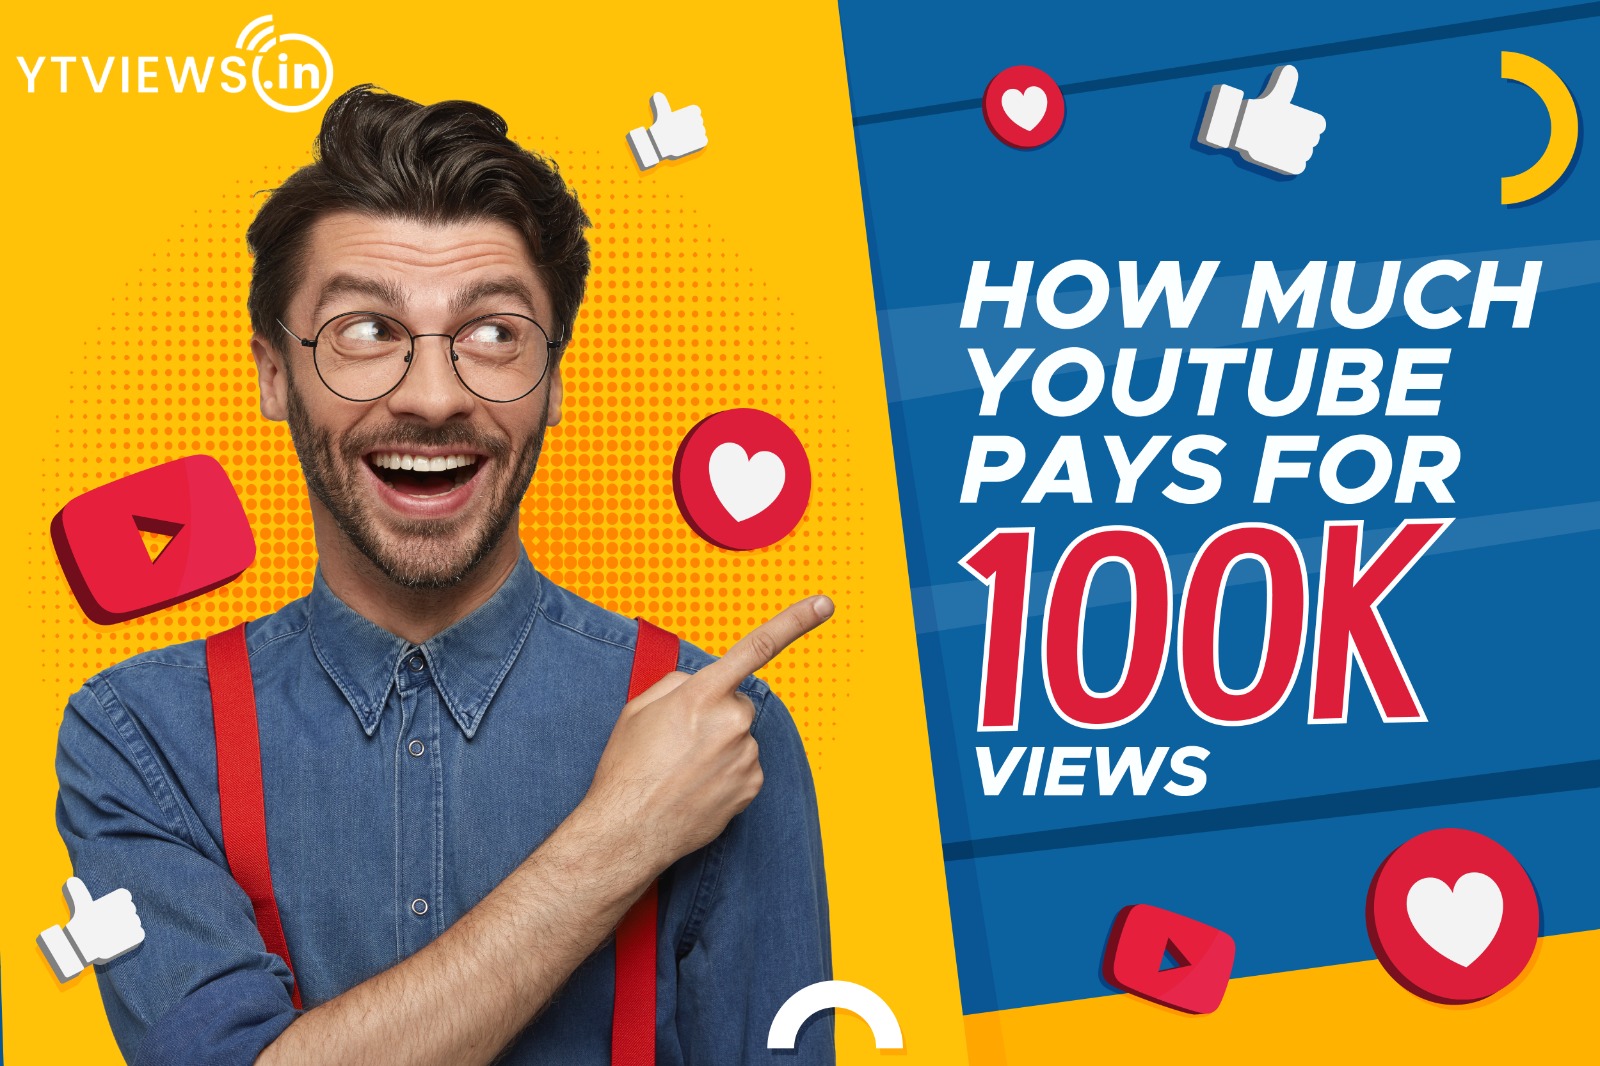 Ytviews reveals: How much can you earn from 100k views on YouTube?